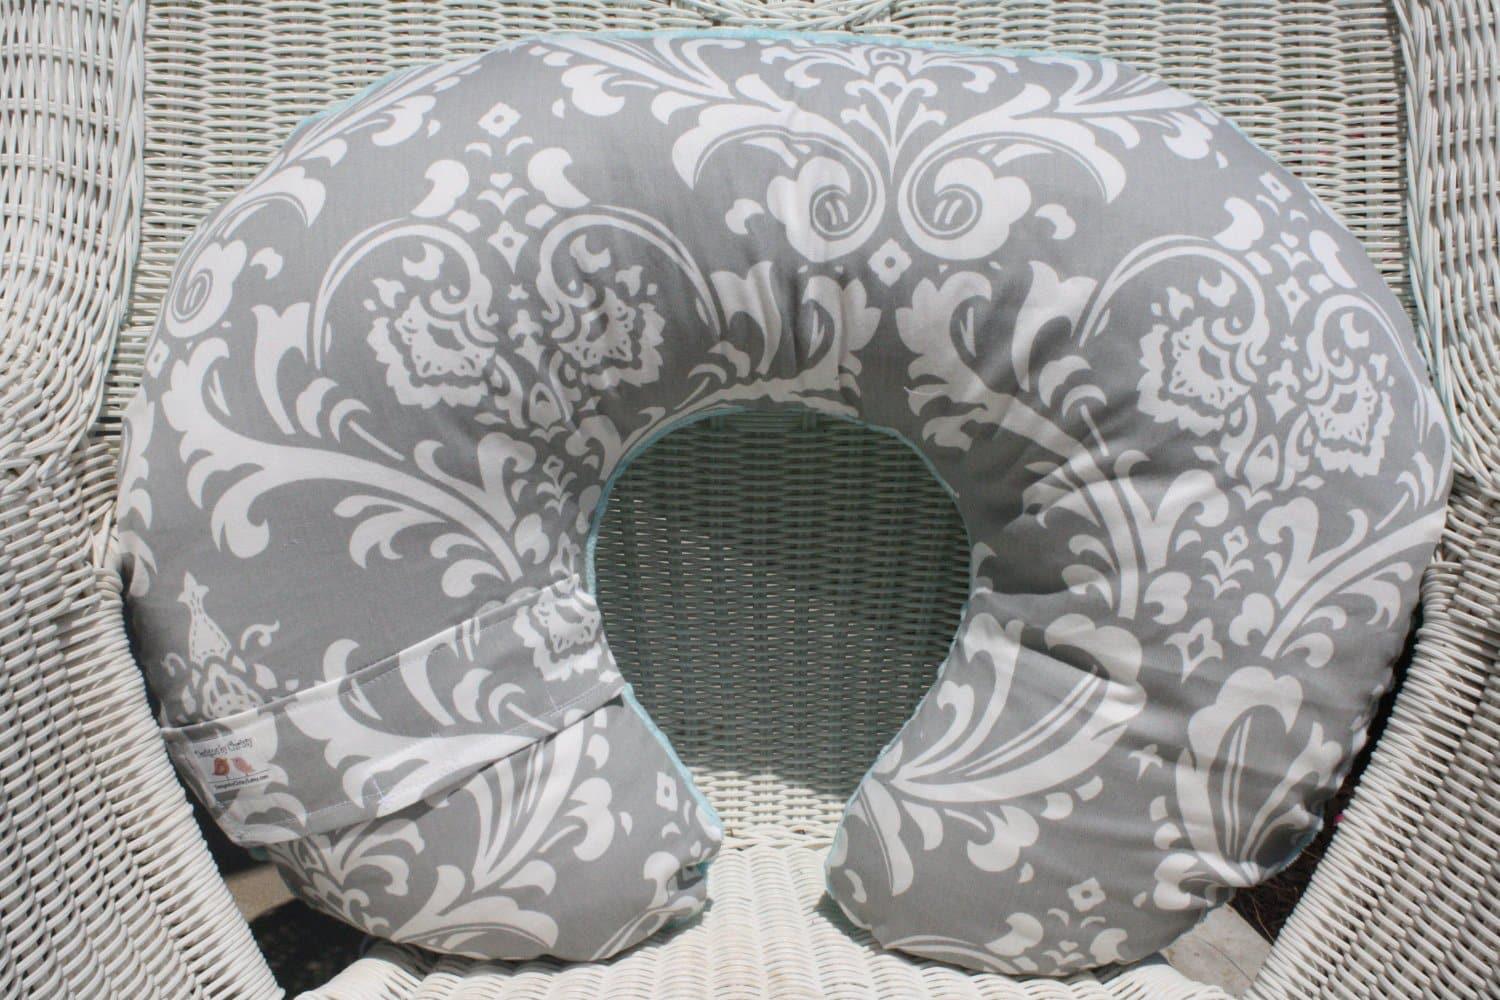 Nursing Pillow Cover - Gray Damask and Minky - DBC Baby Bedding Co 